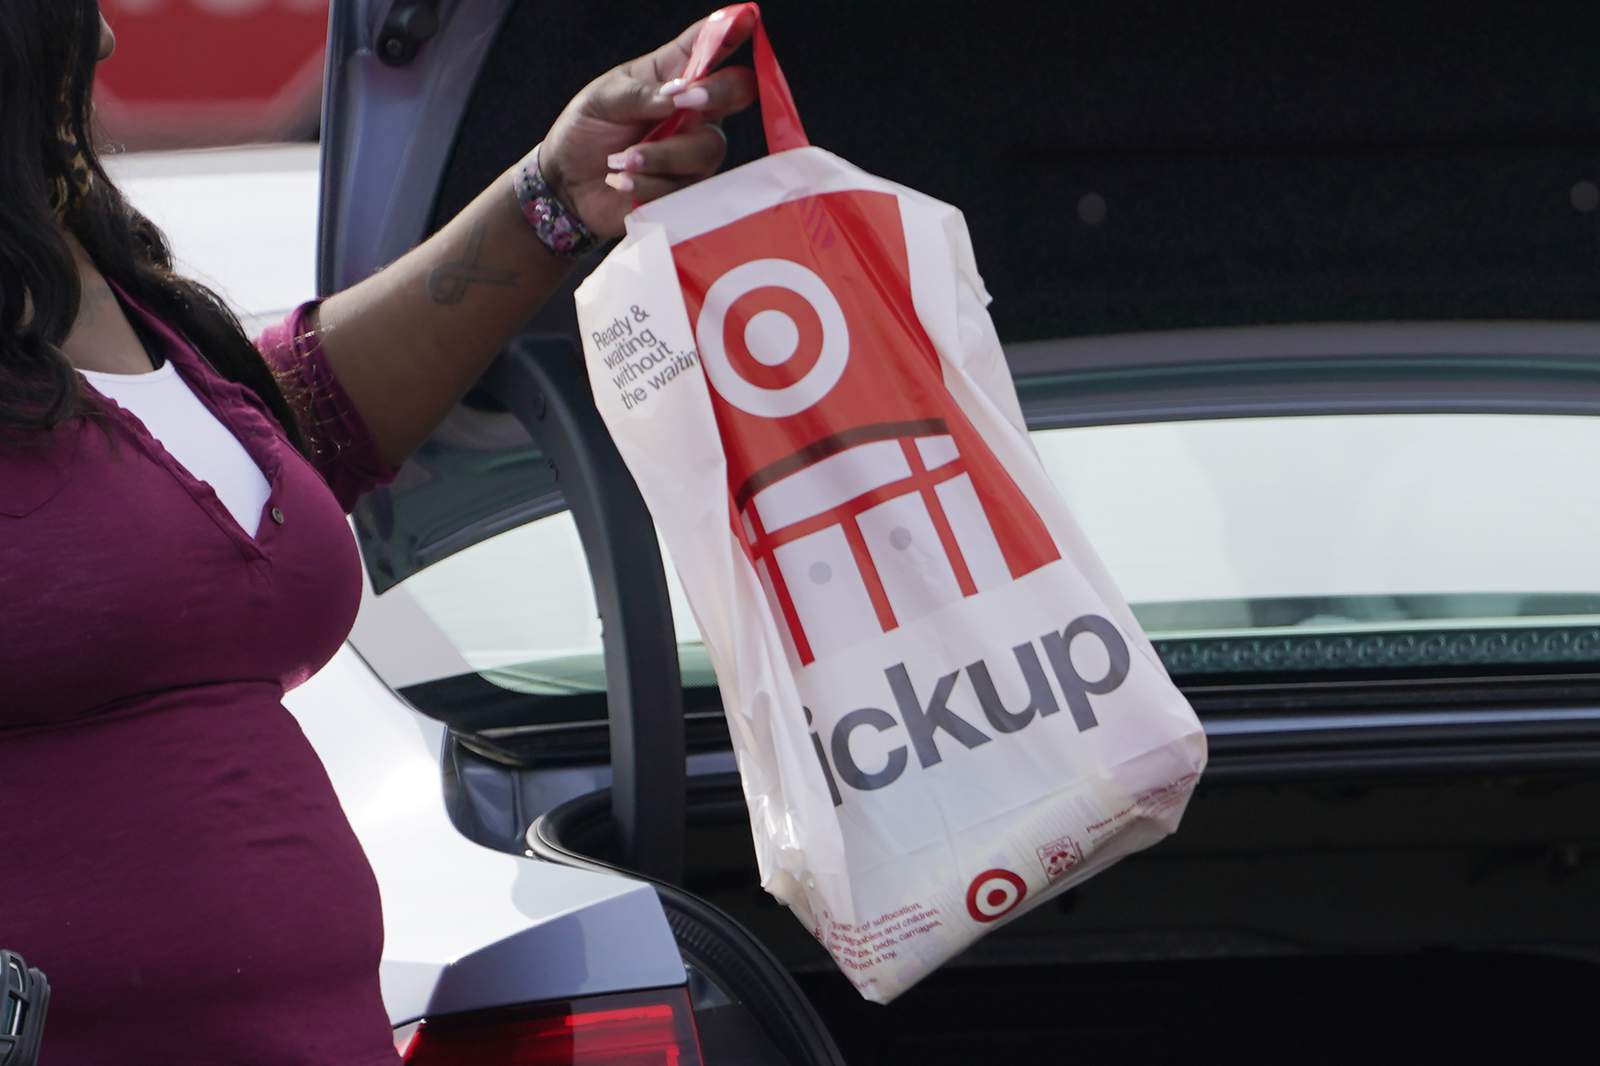 Retail group: holiday sales up 8.3% amid big spending shift